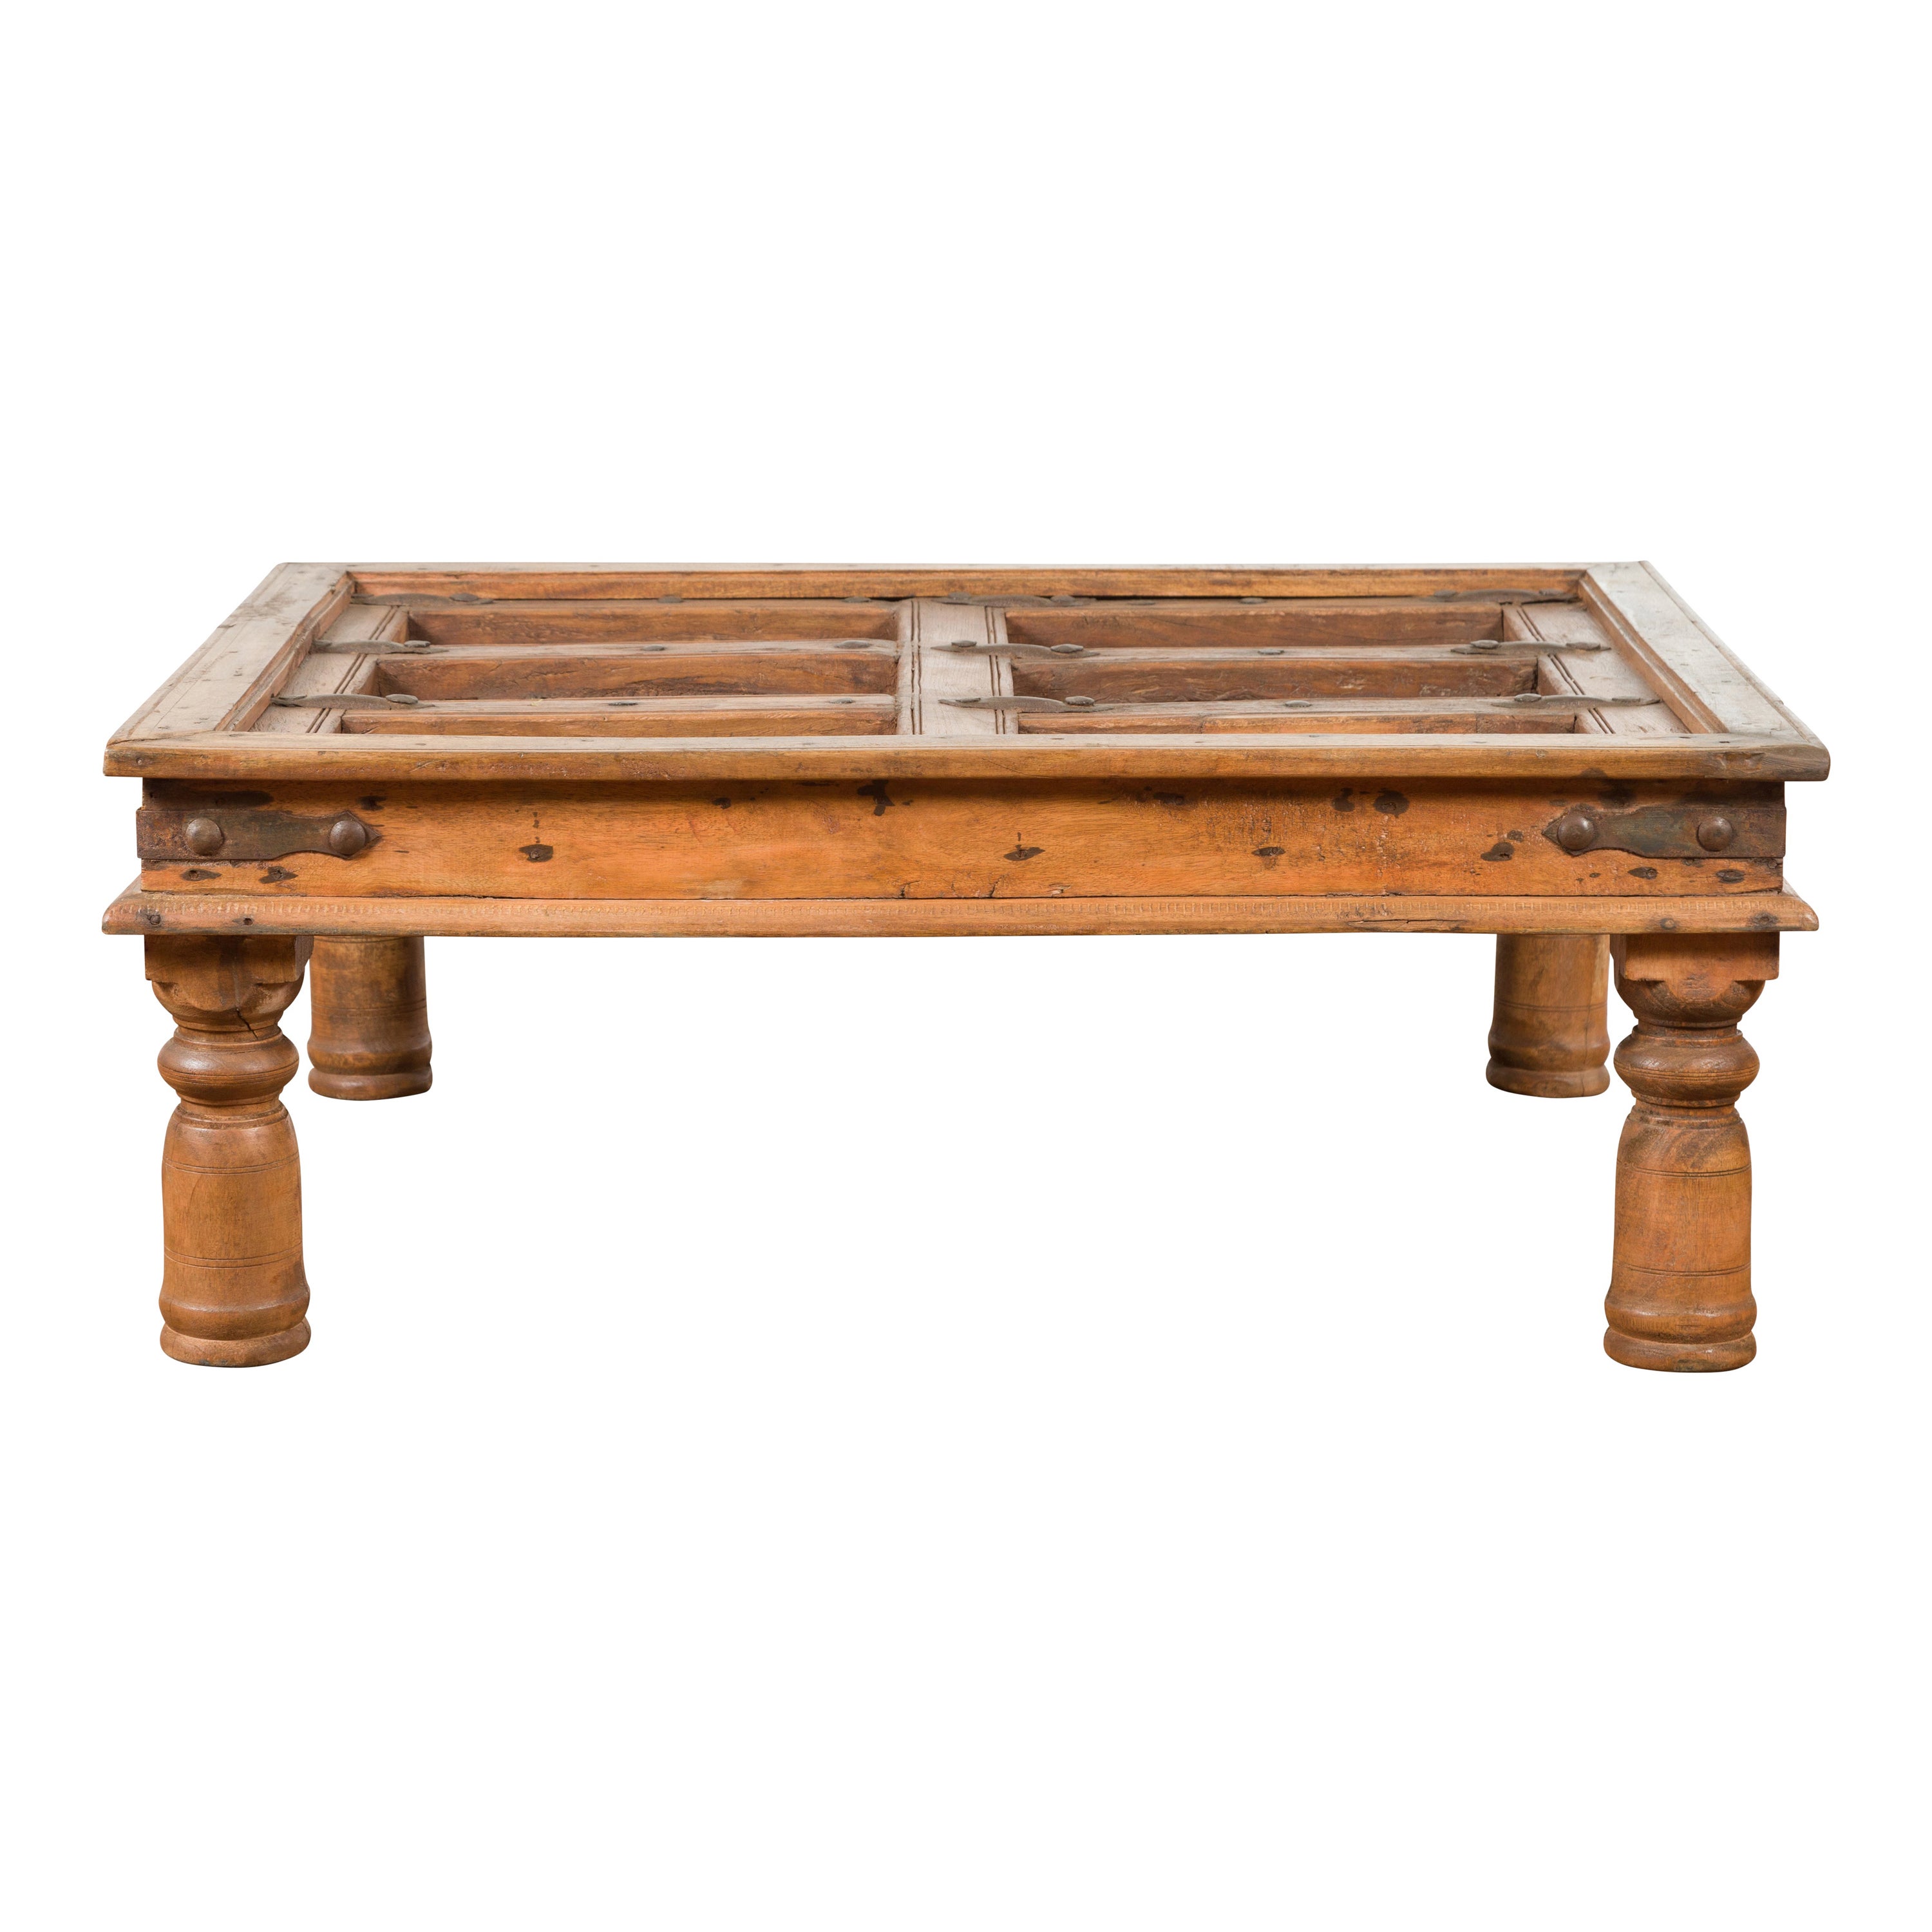 Indian 19th Century Sheesham Wood Courtyard Door Redesigned as a Coffee Table For Sale